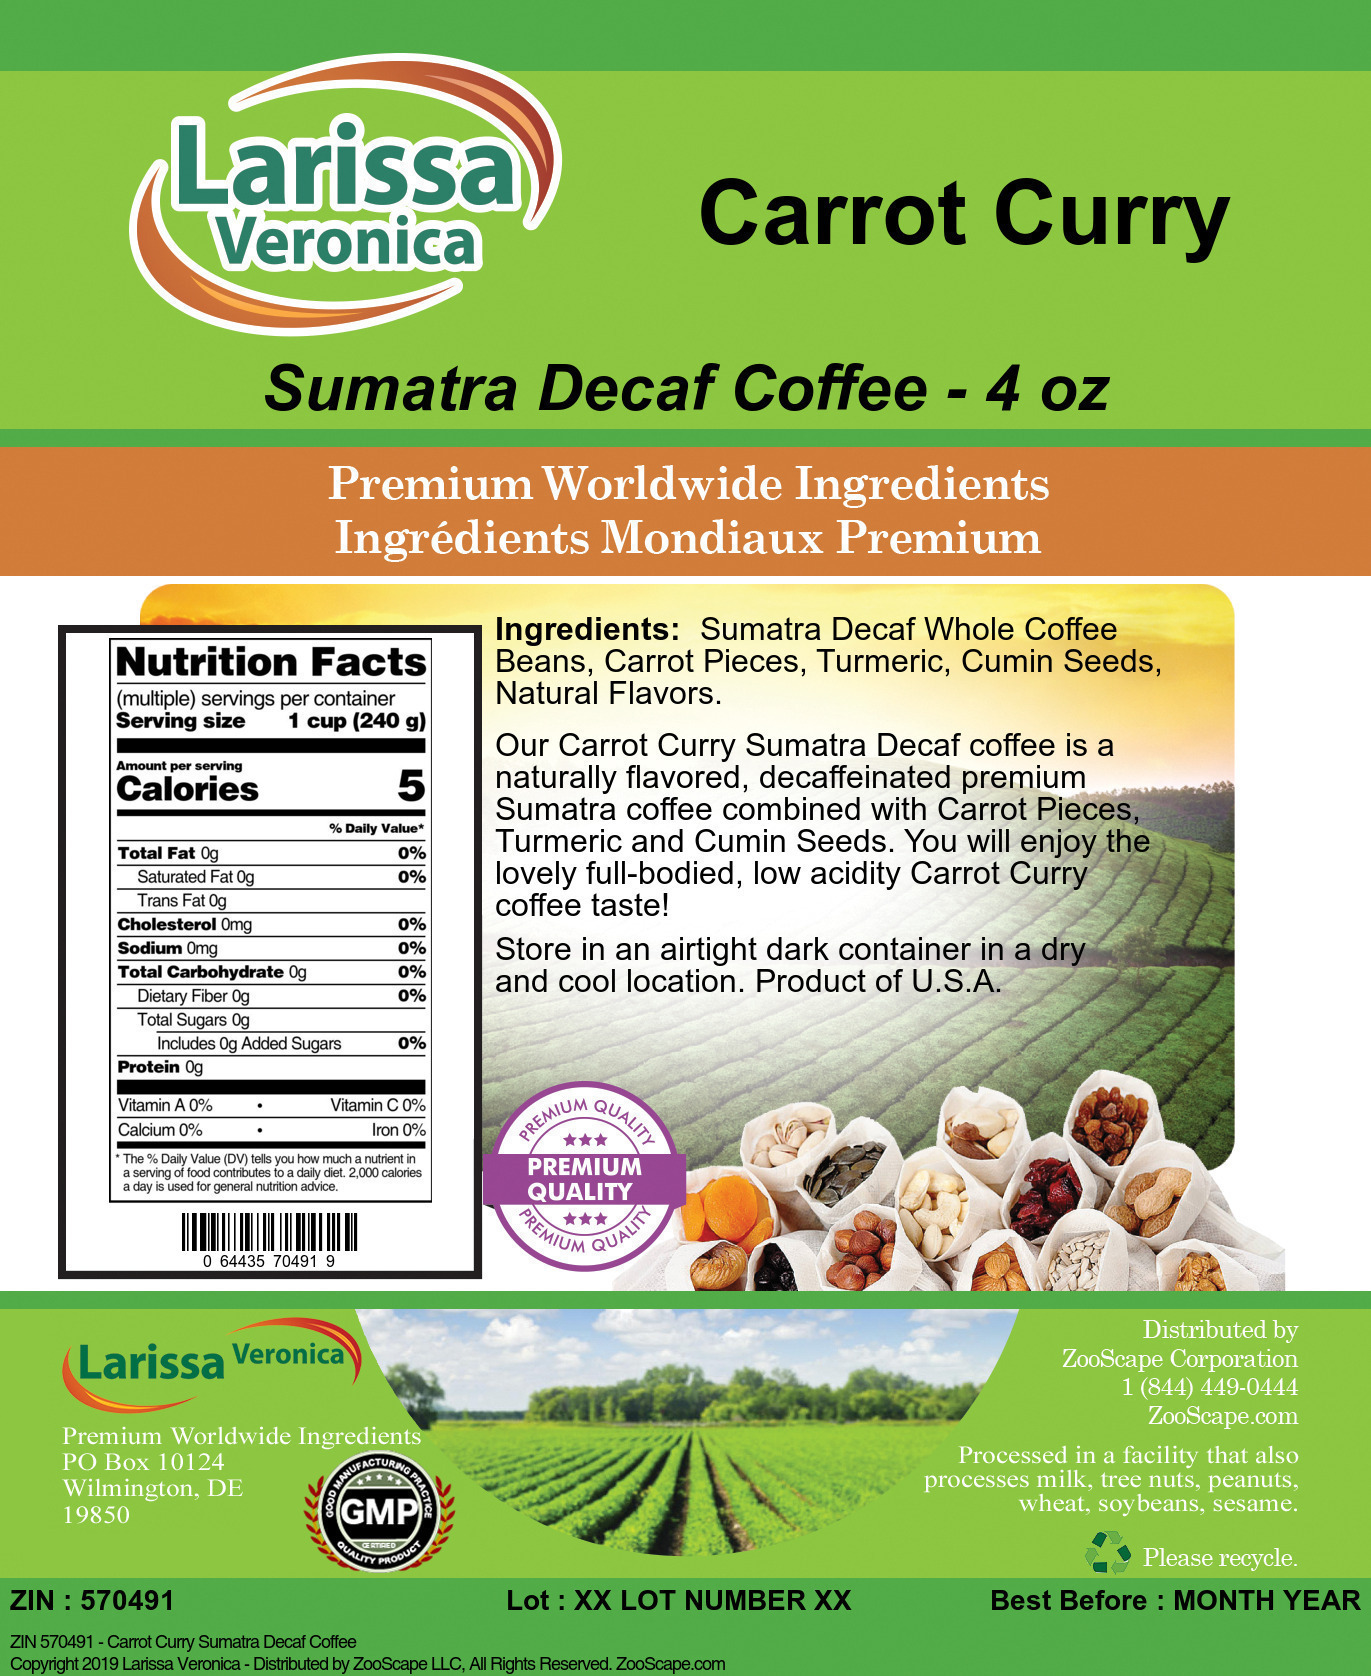 Carrot Curry Sumatra Decaf Coffee - Label